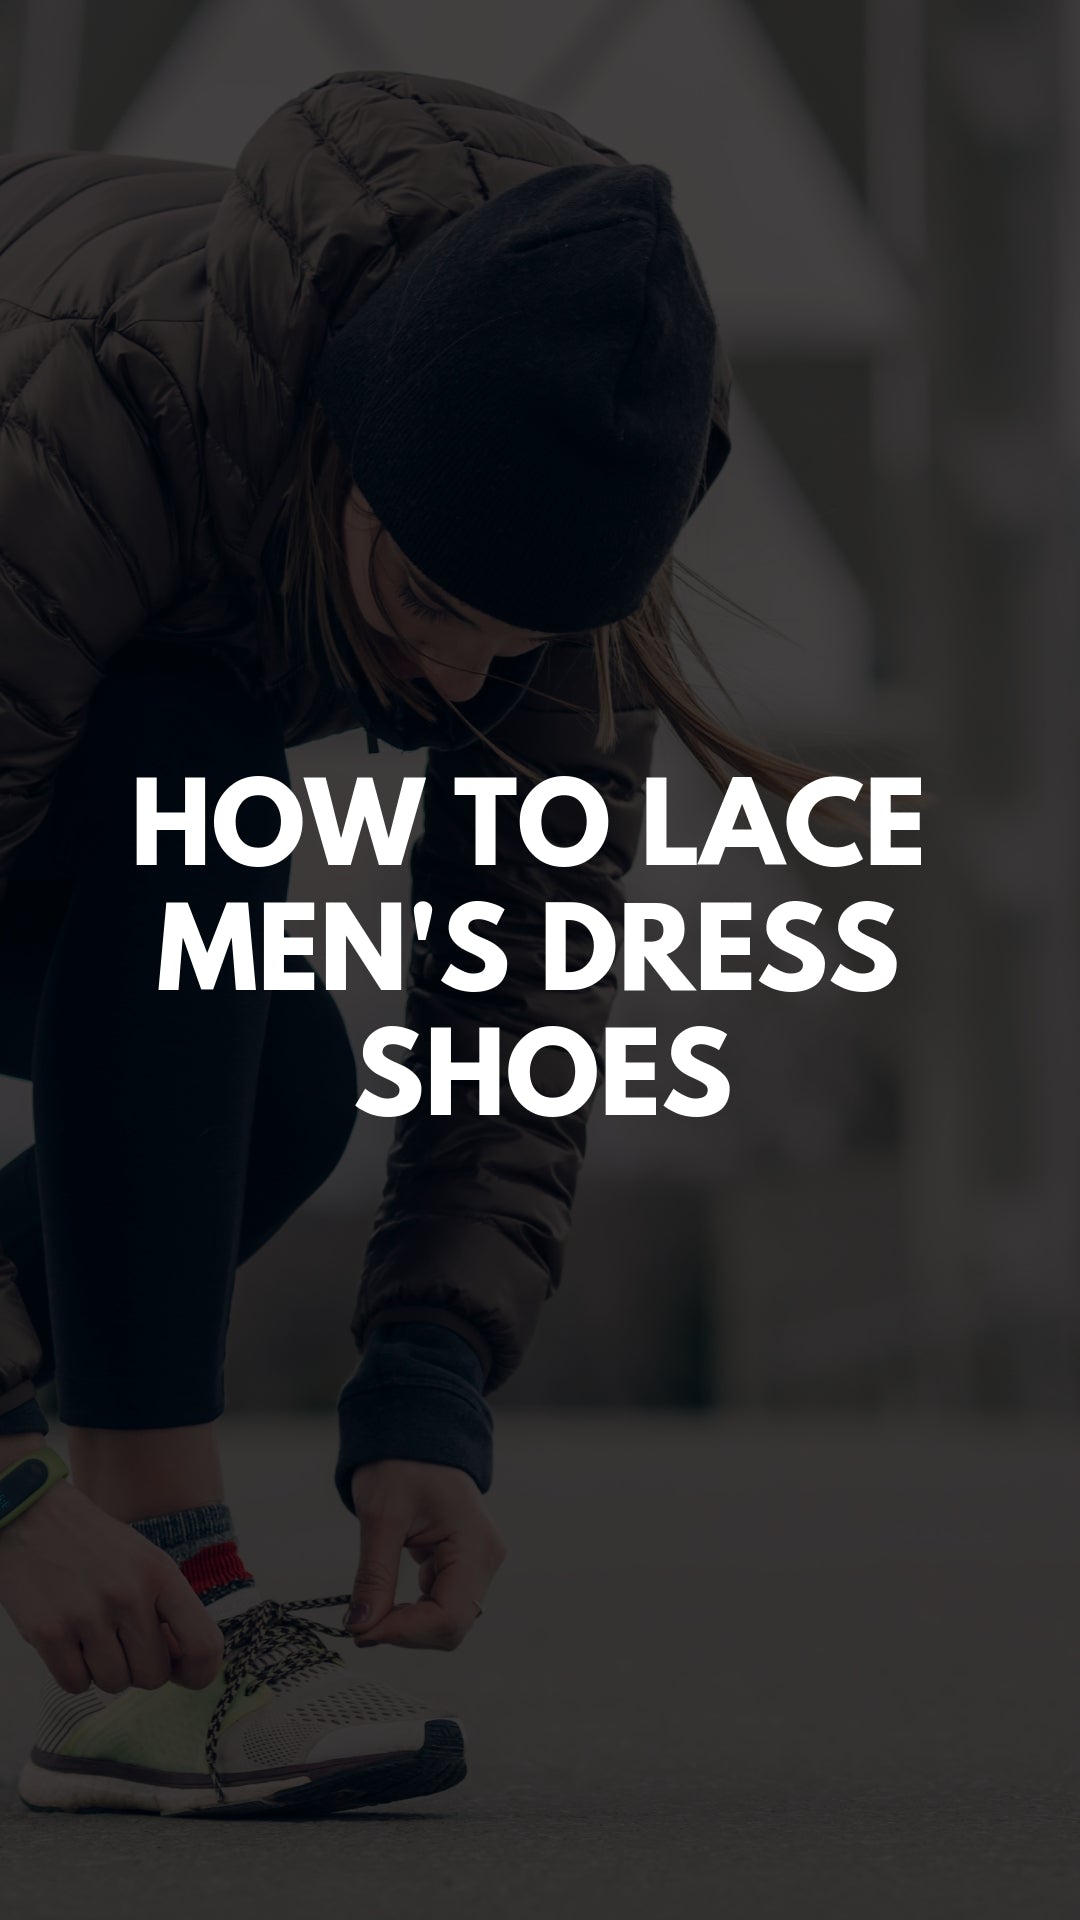 HOW TO LACE MEN'S DRESS SHOES #fashiontips